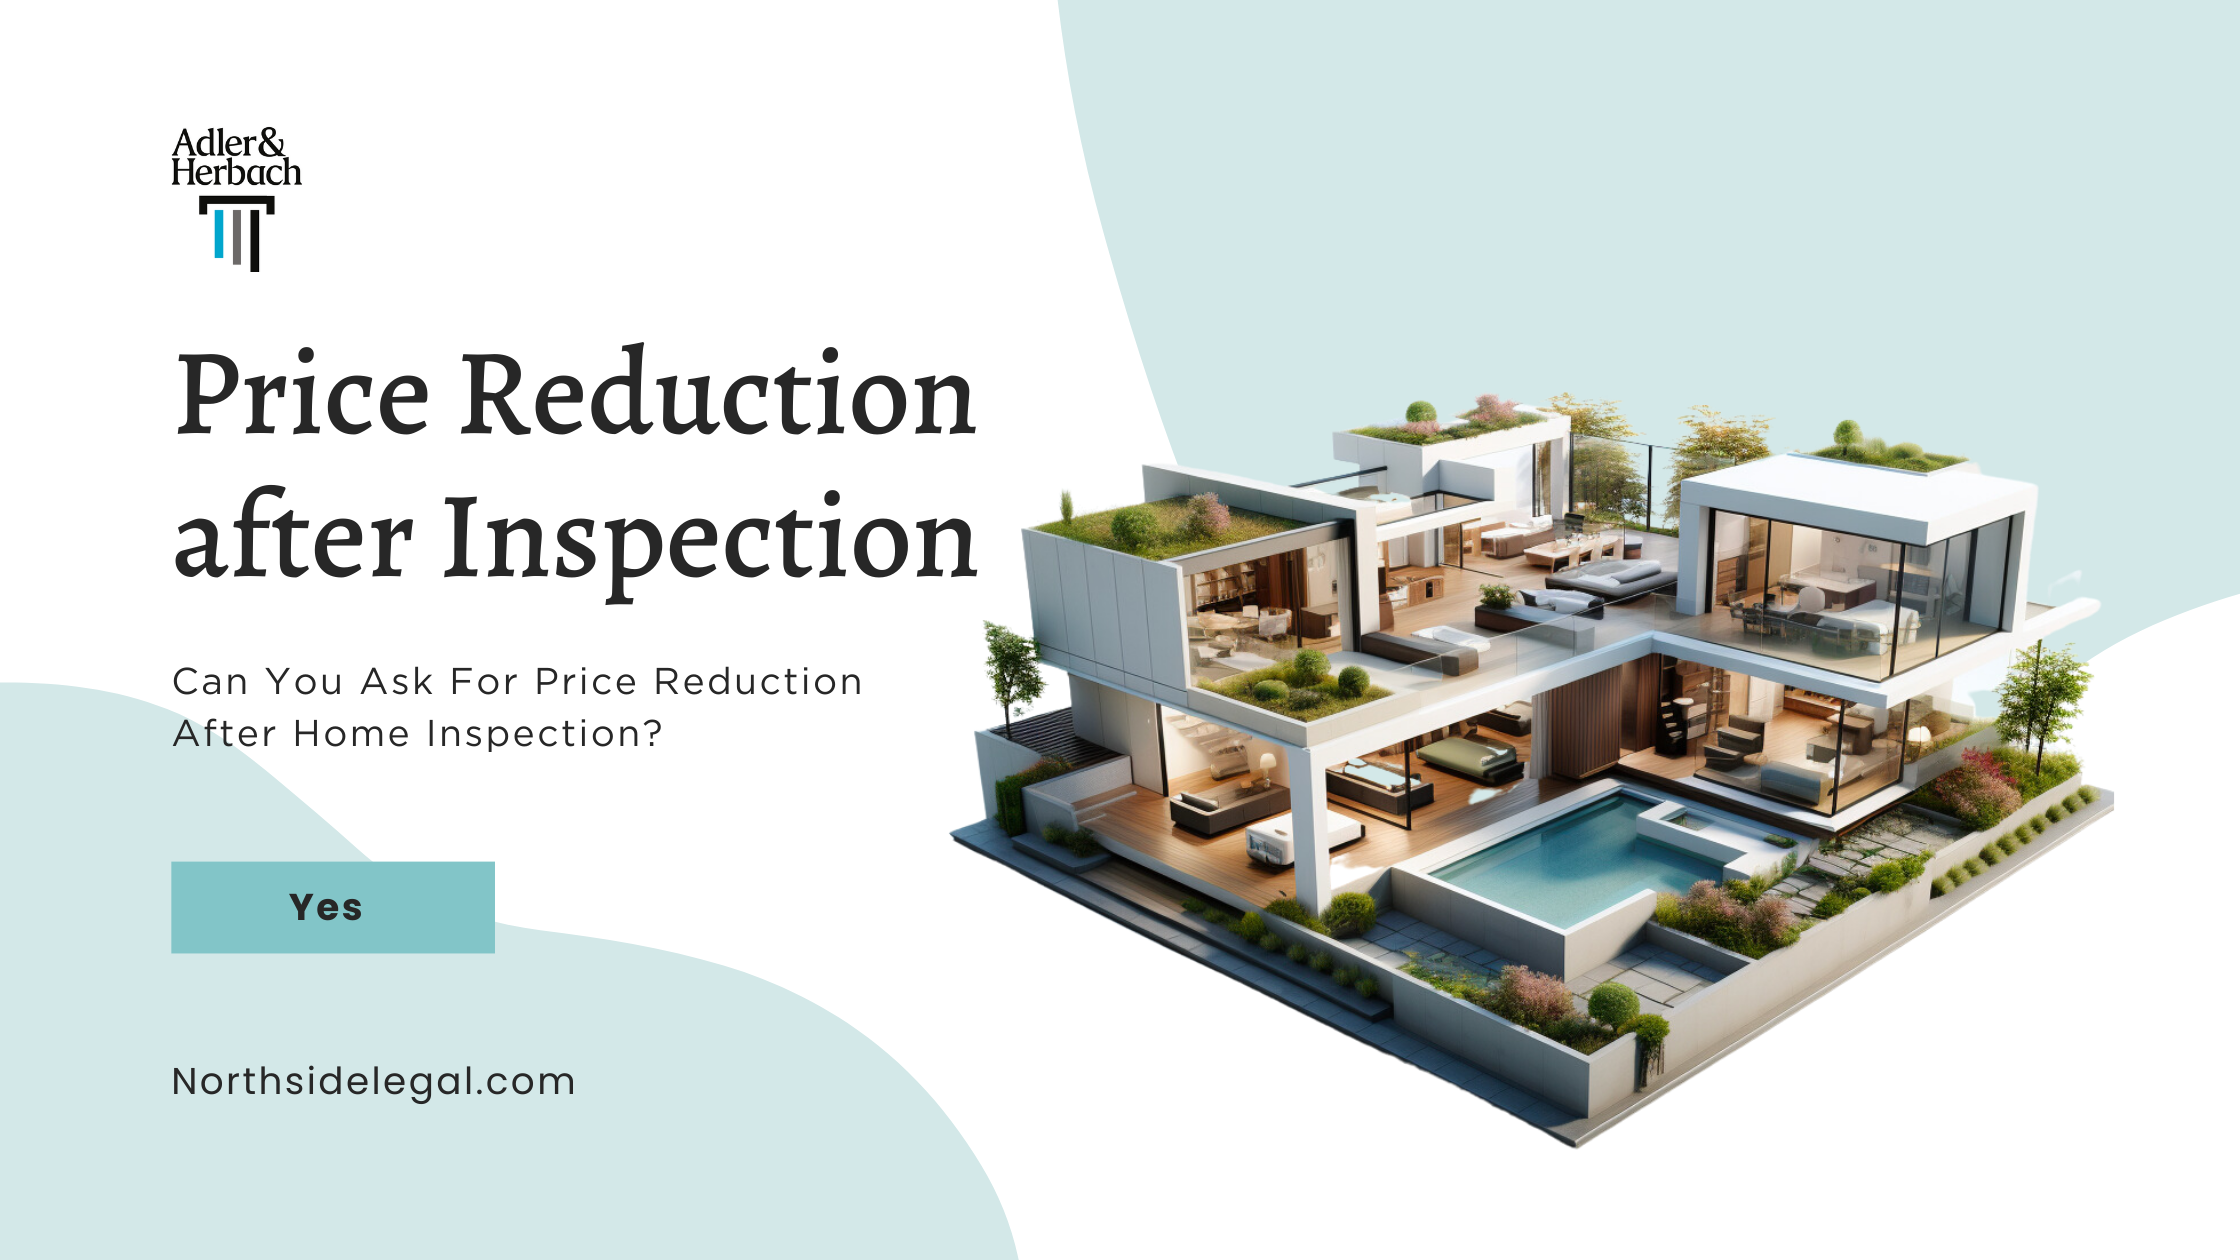 Can You Ask For Price Reduction After Inspection In Illinois?